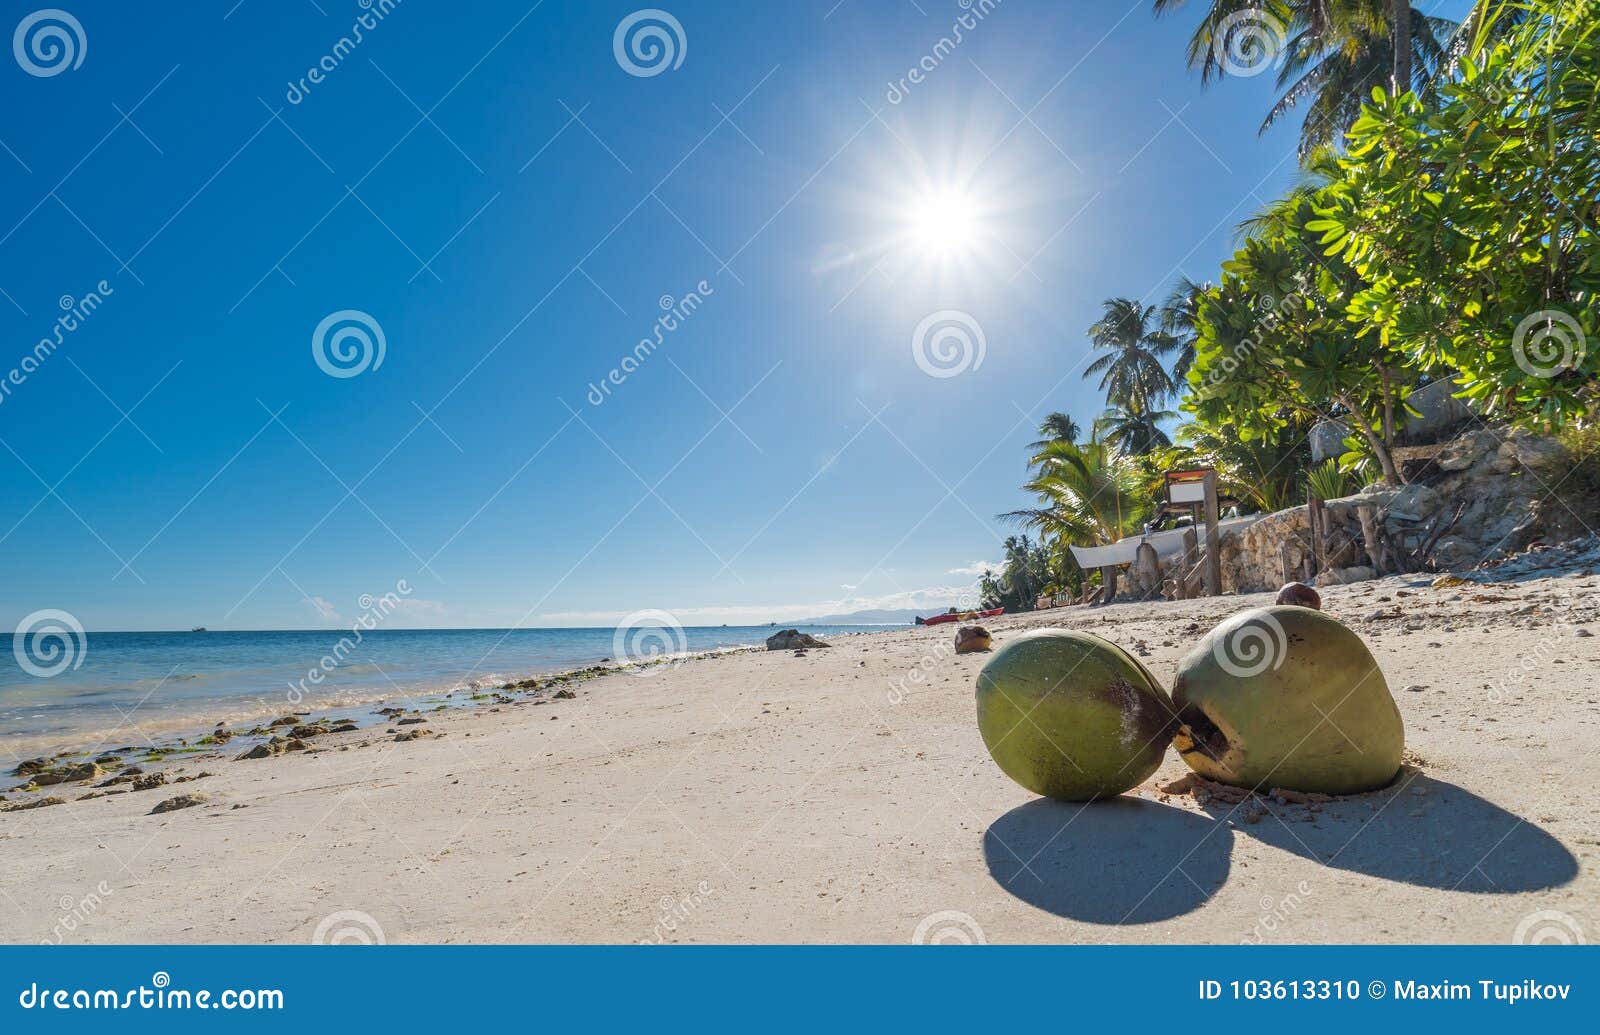 view of coconuts at anda beach bohol island with coconut palms